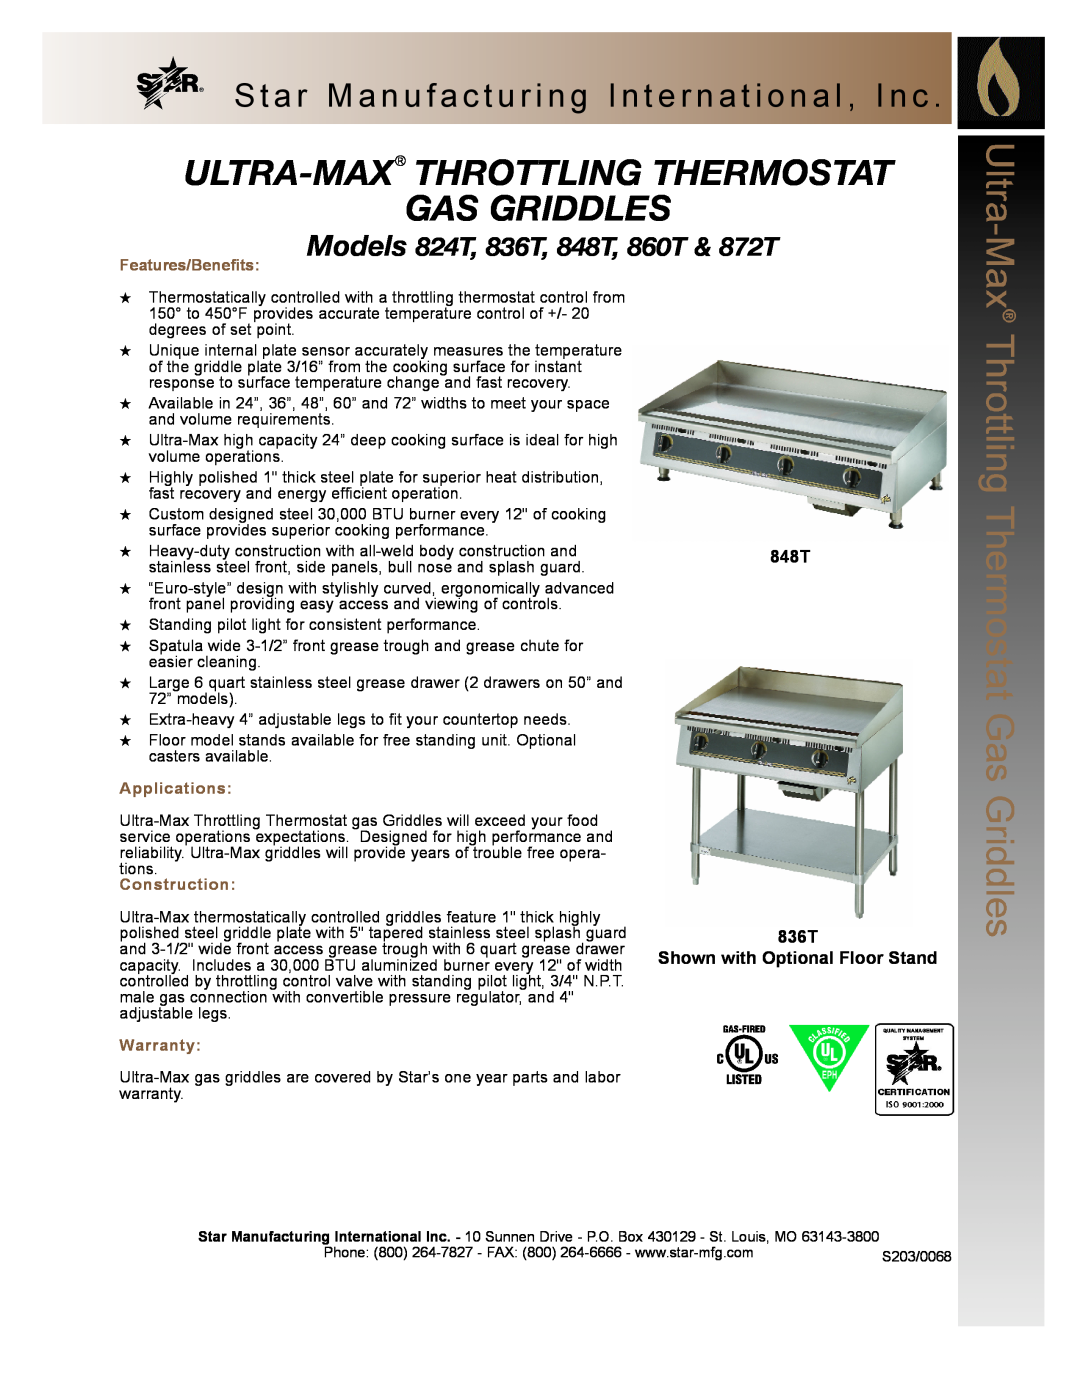 Star Manufacturing warranty Ultra-Max Throttling Thermostat Gas Griddles, Models 824T, 836T, 848T, 860T & 872T 